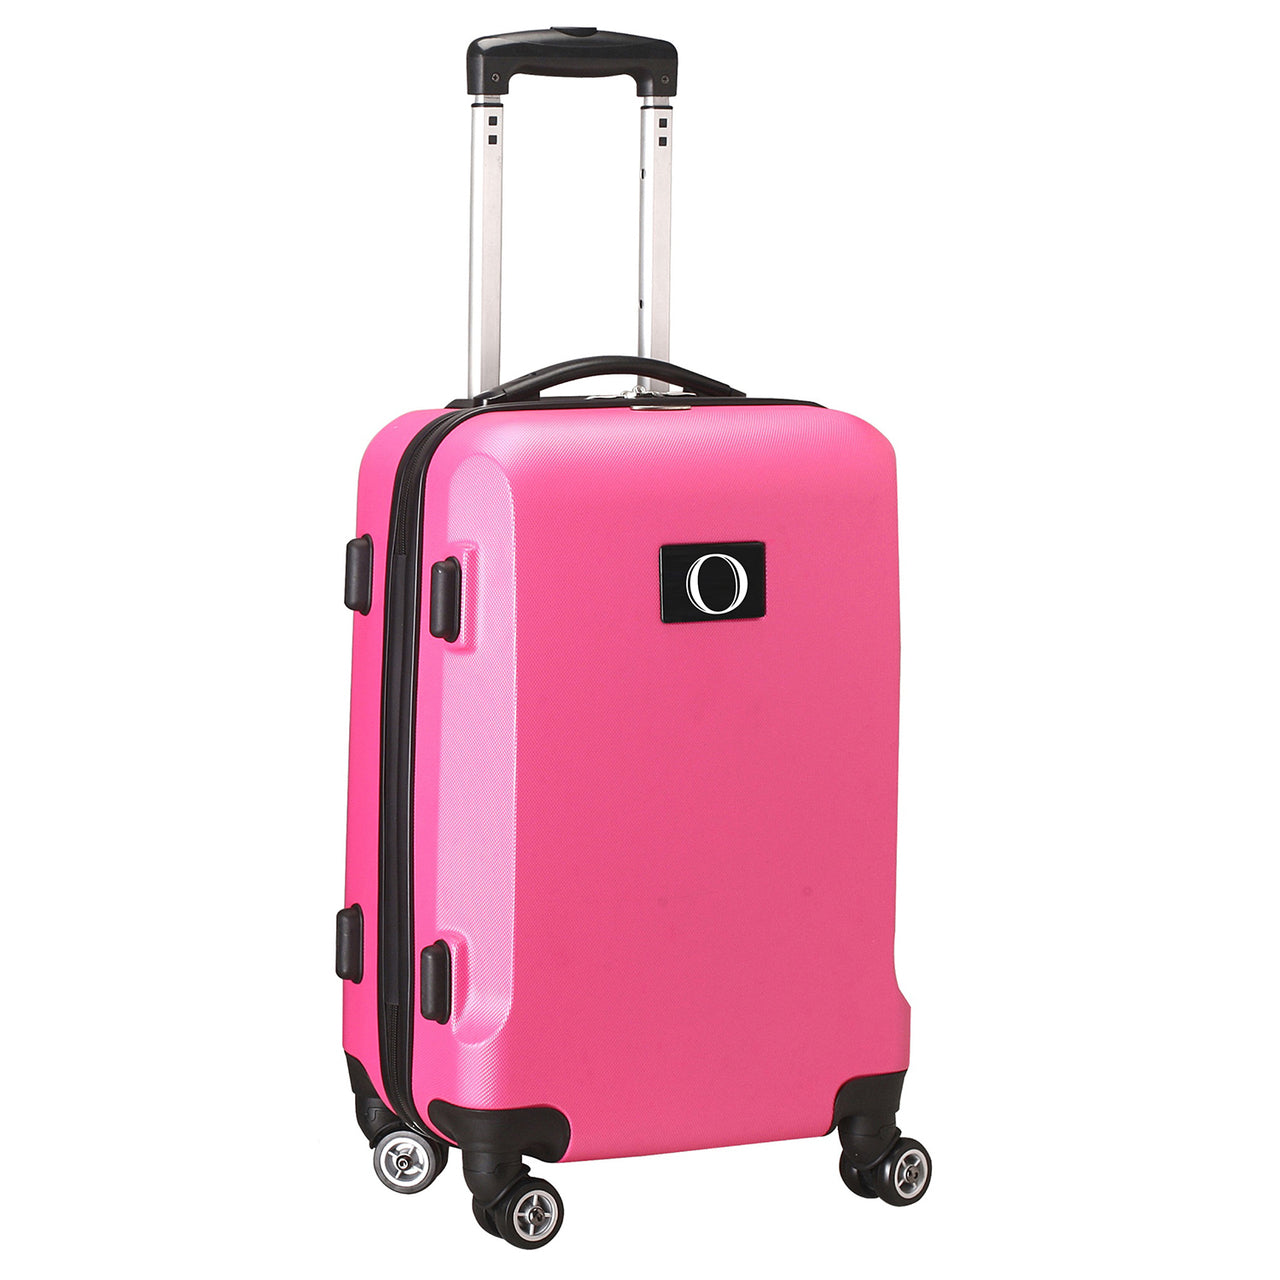 Personalized Initial Name letter "O" 20 inches Carry on Hardcase Spinner Luggage by Mojo in PINK